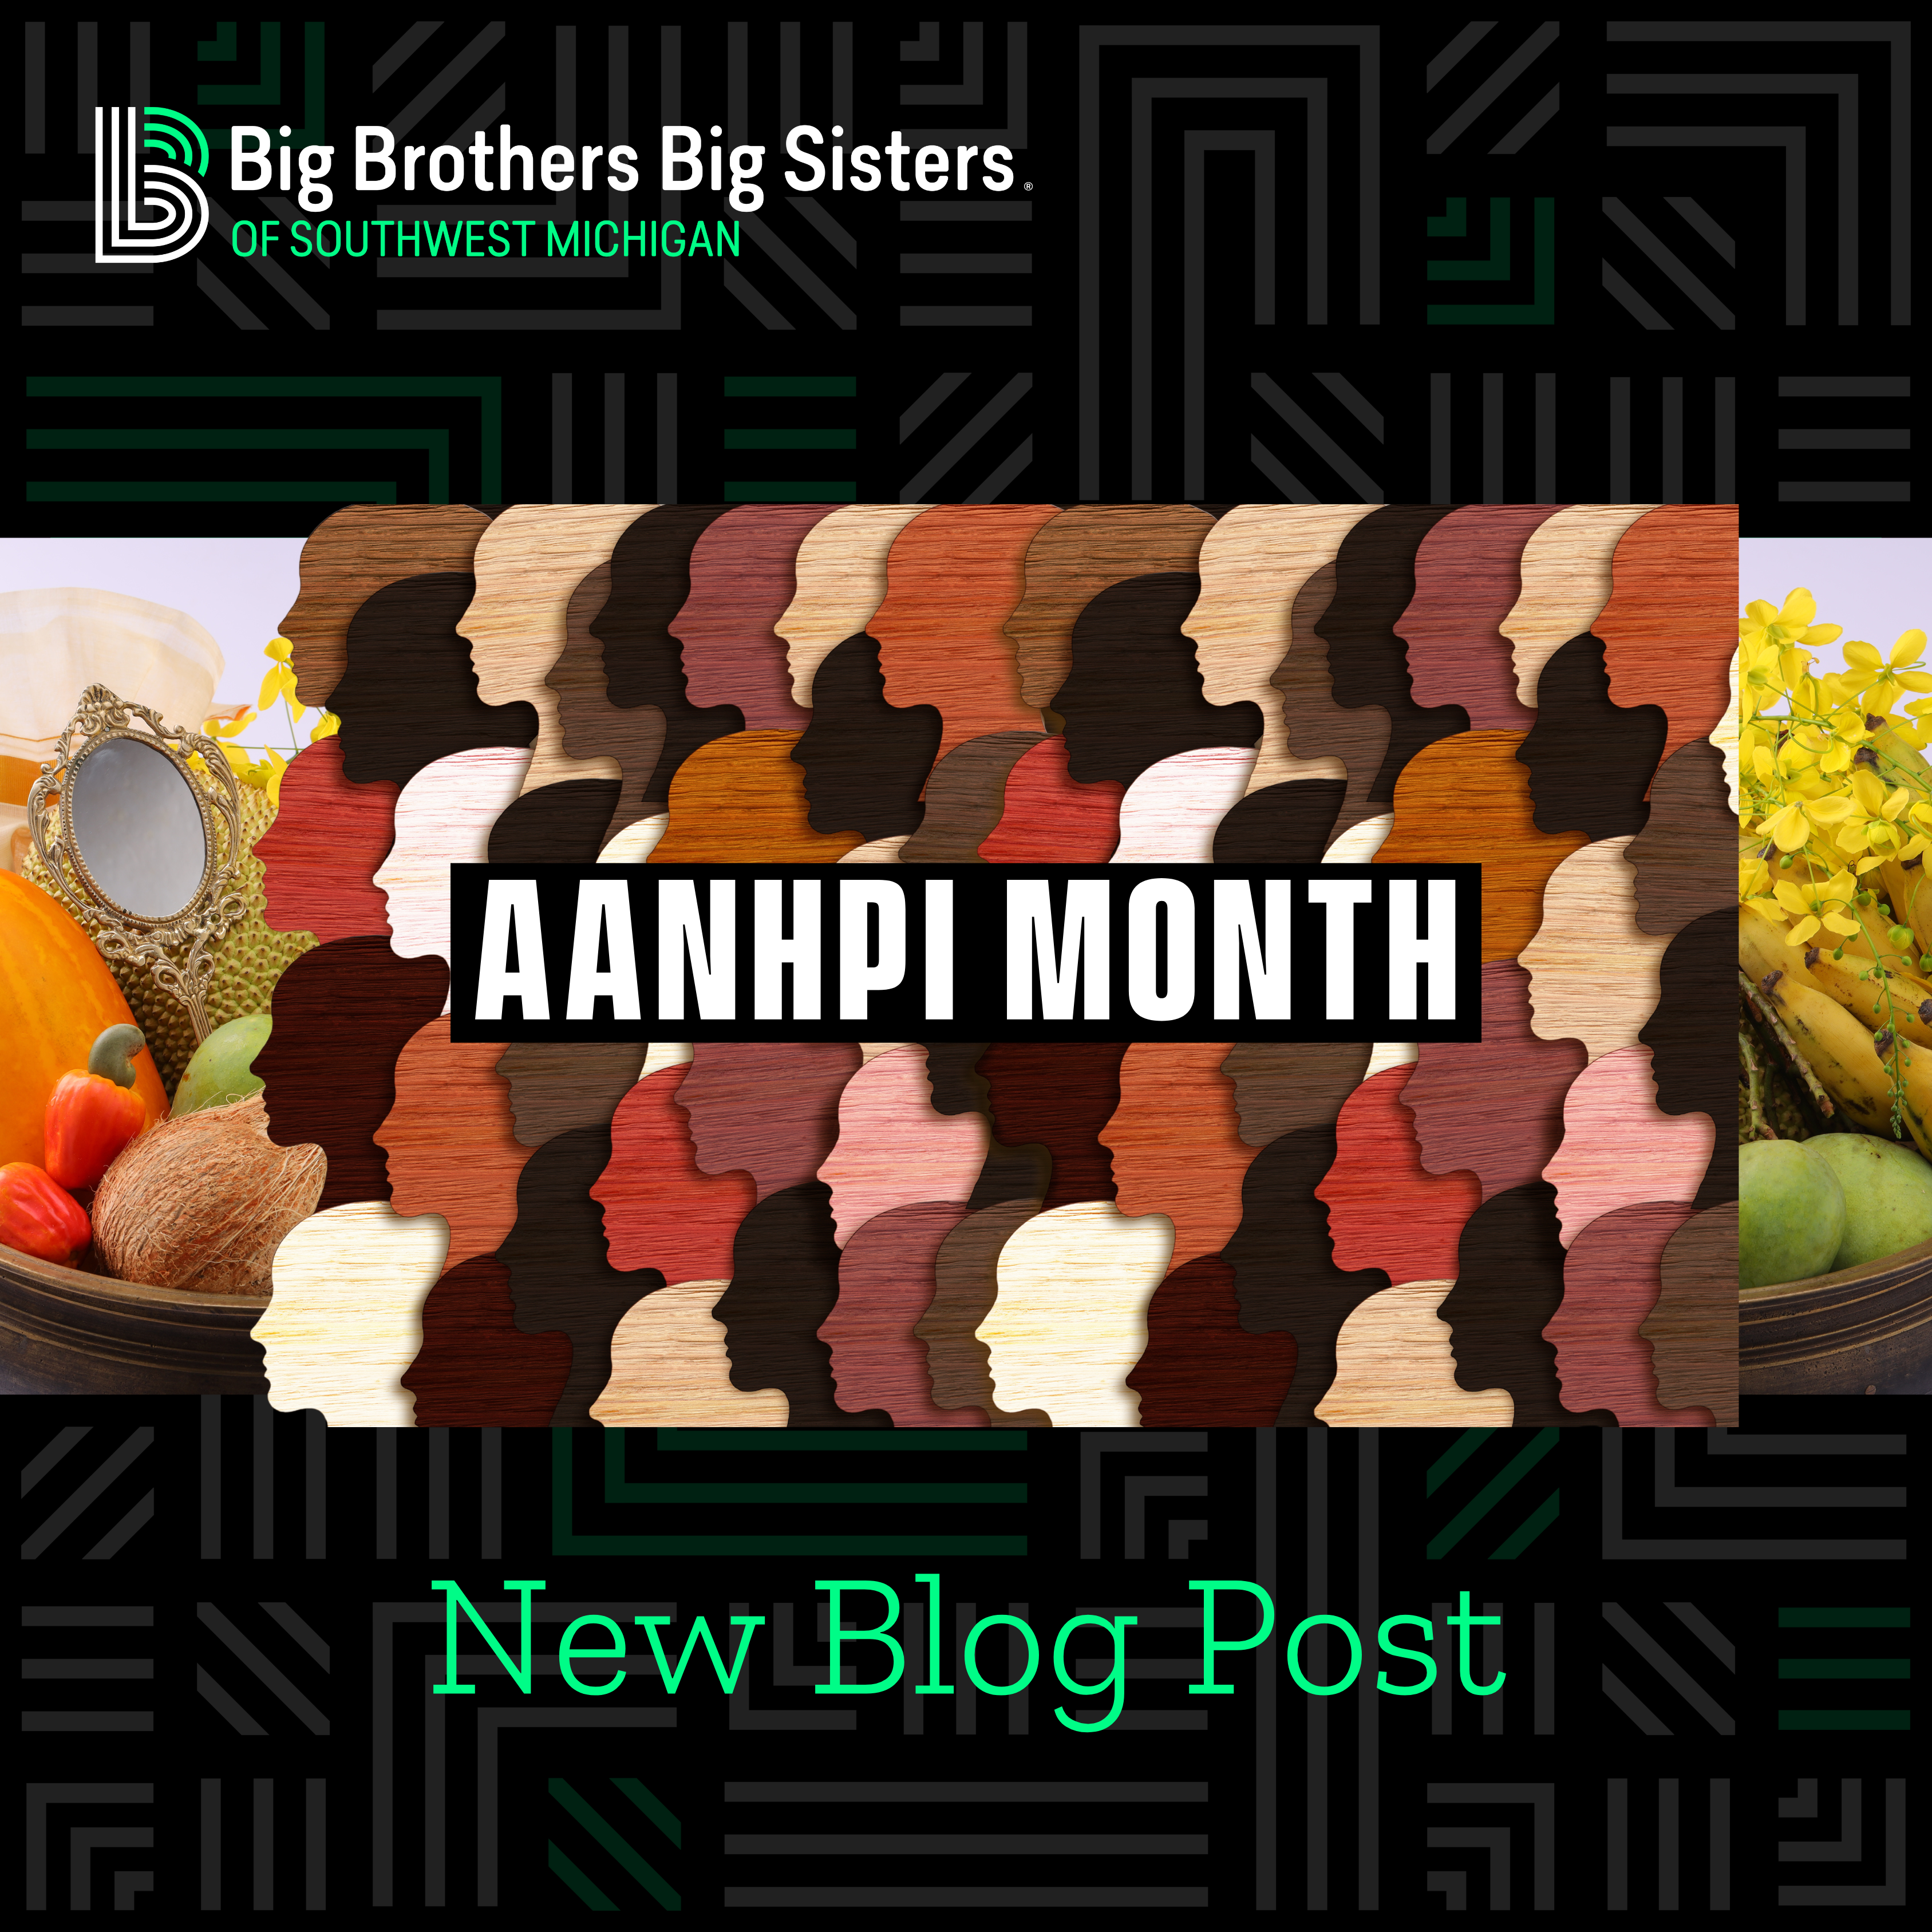 MAY IS NATIONAL AANHPI MONTH